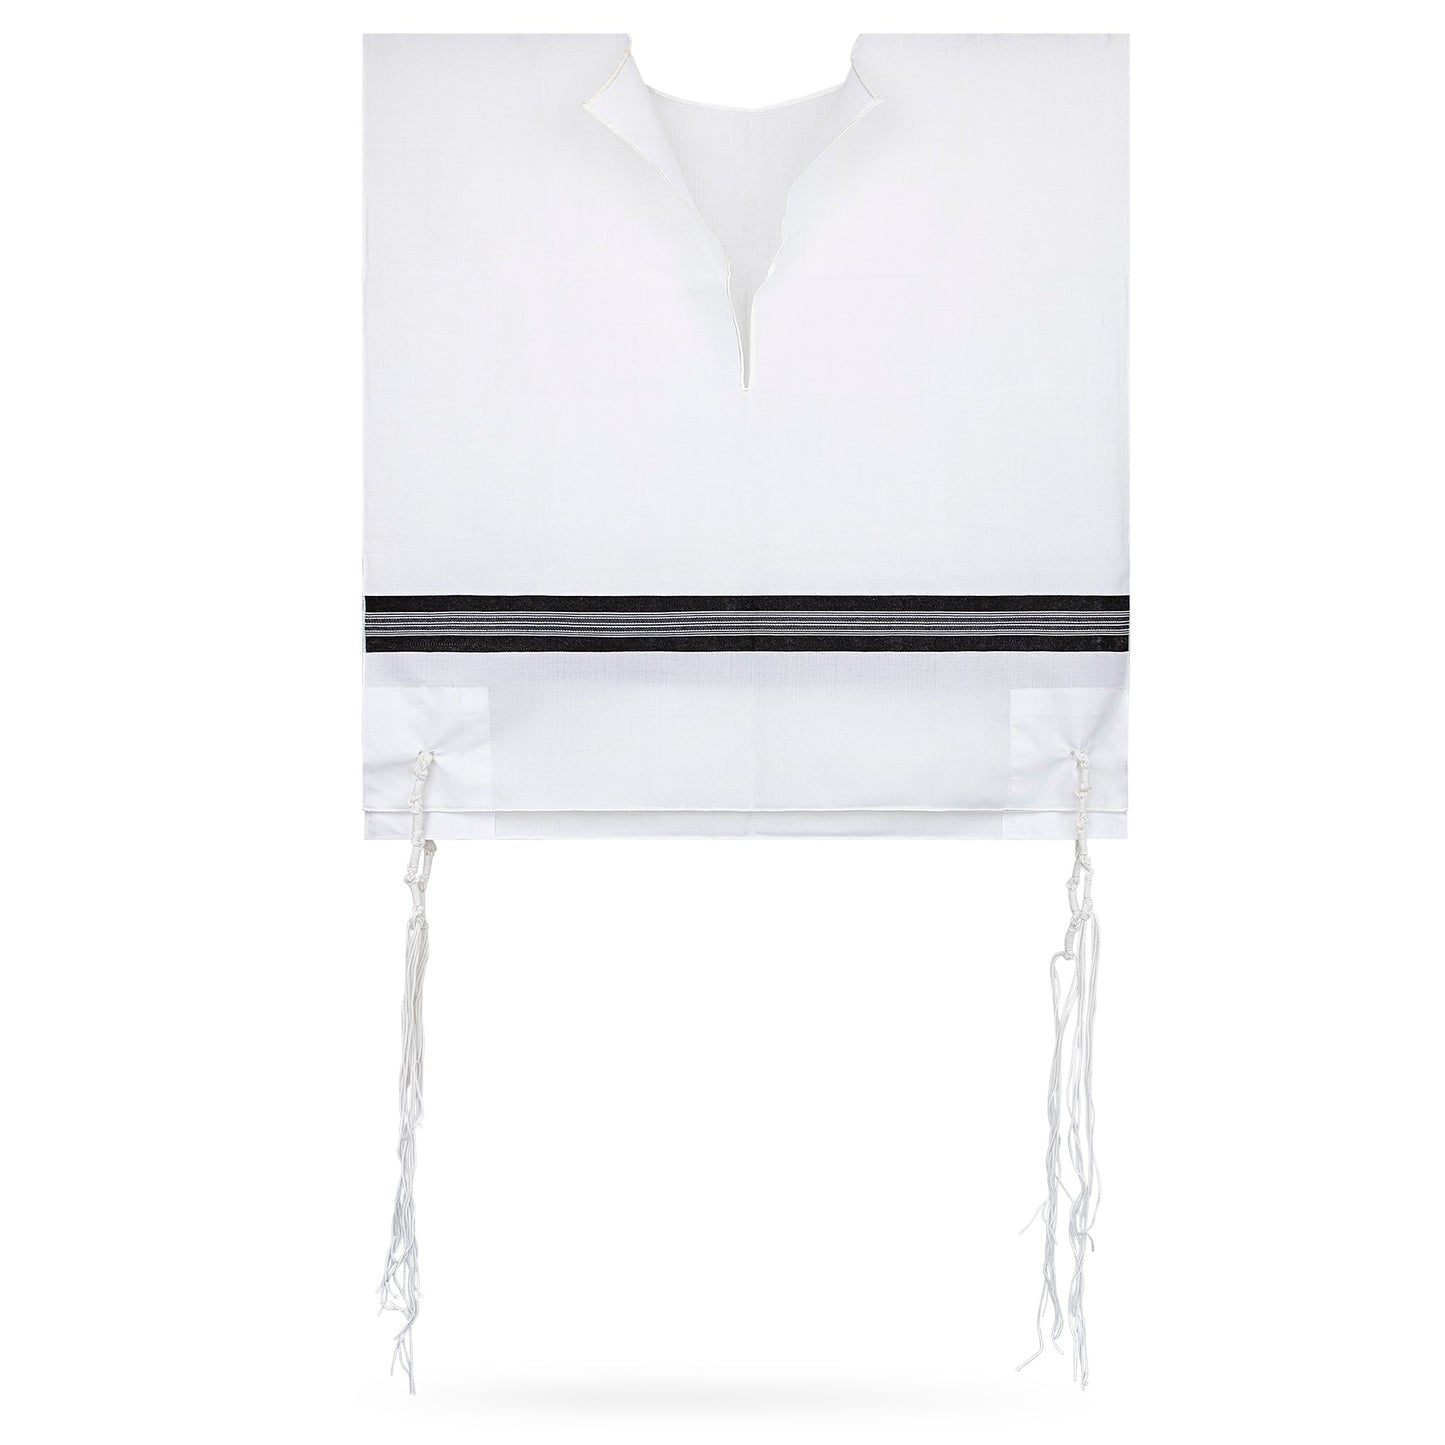 Tzitzis | ציצית | Unknipped with Thin strings in package